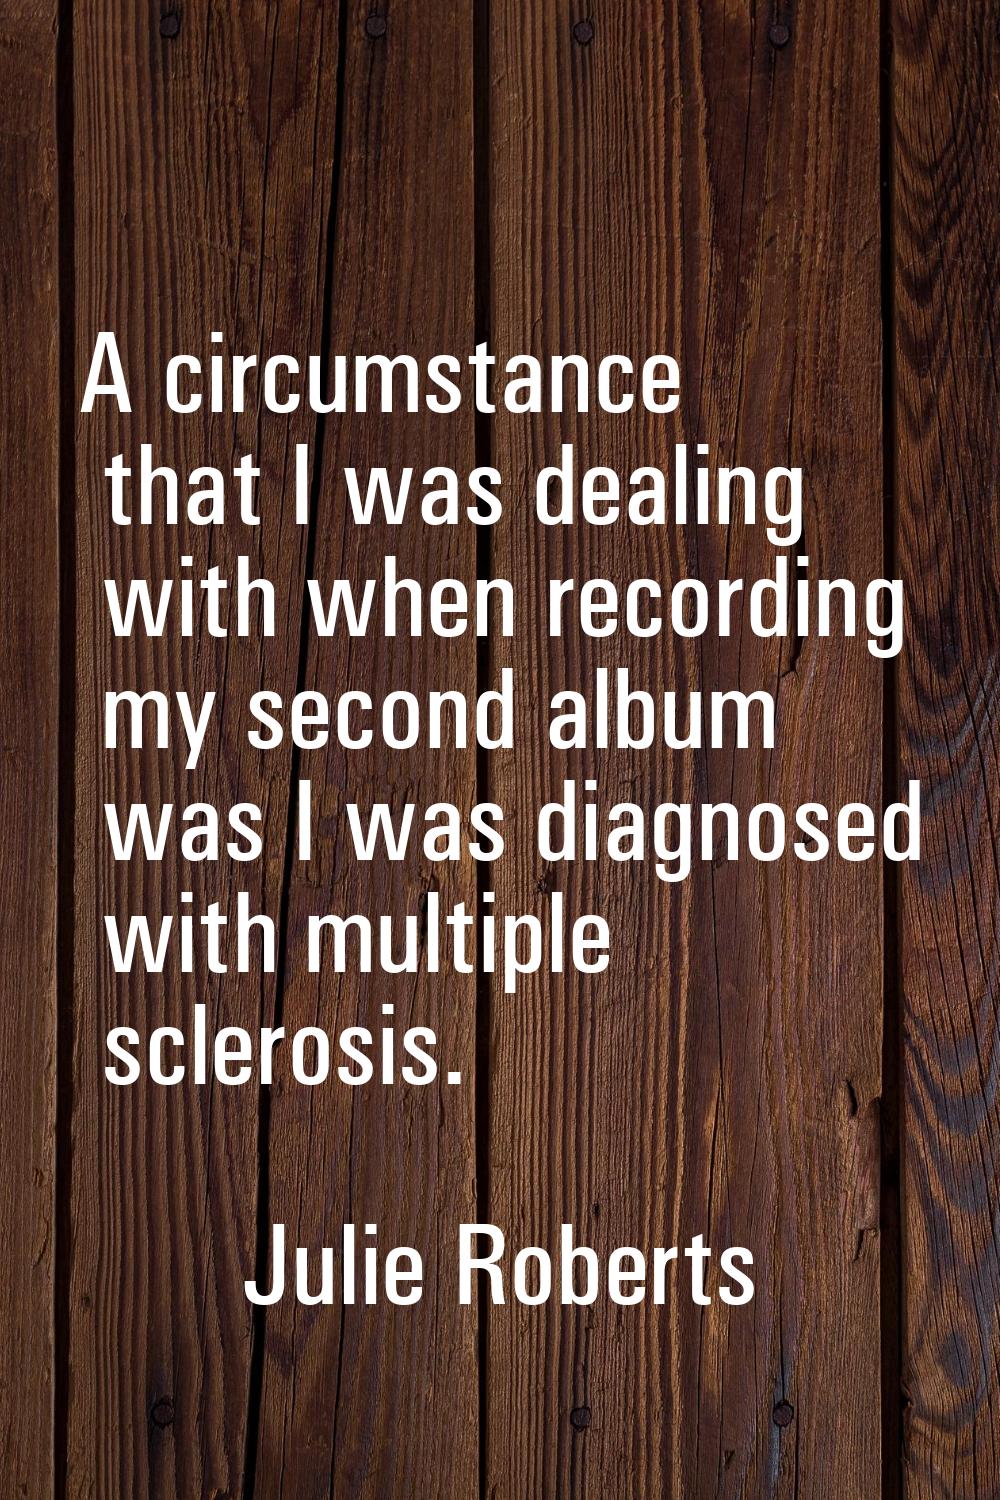 A circumstance that I was dealing with when recording my second album was I was diagnosed with mult